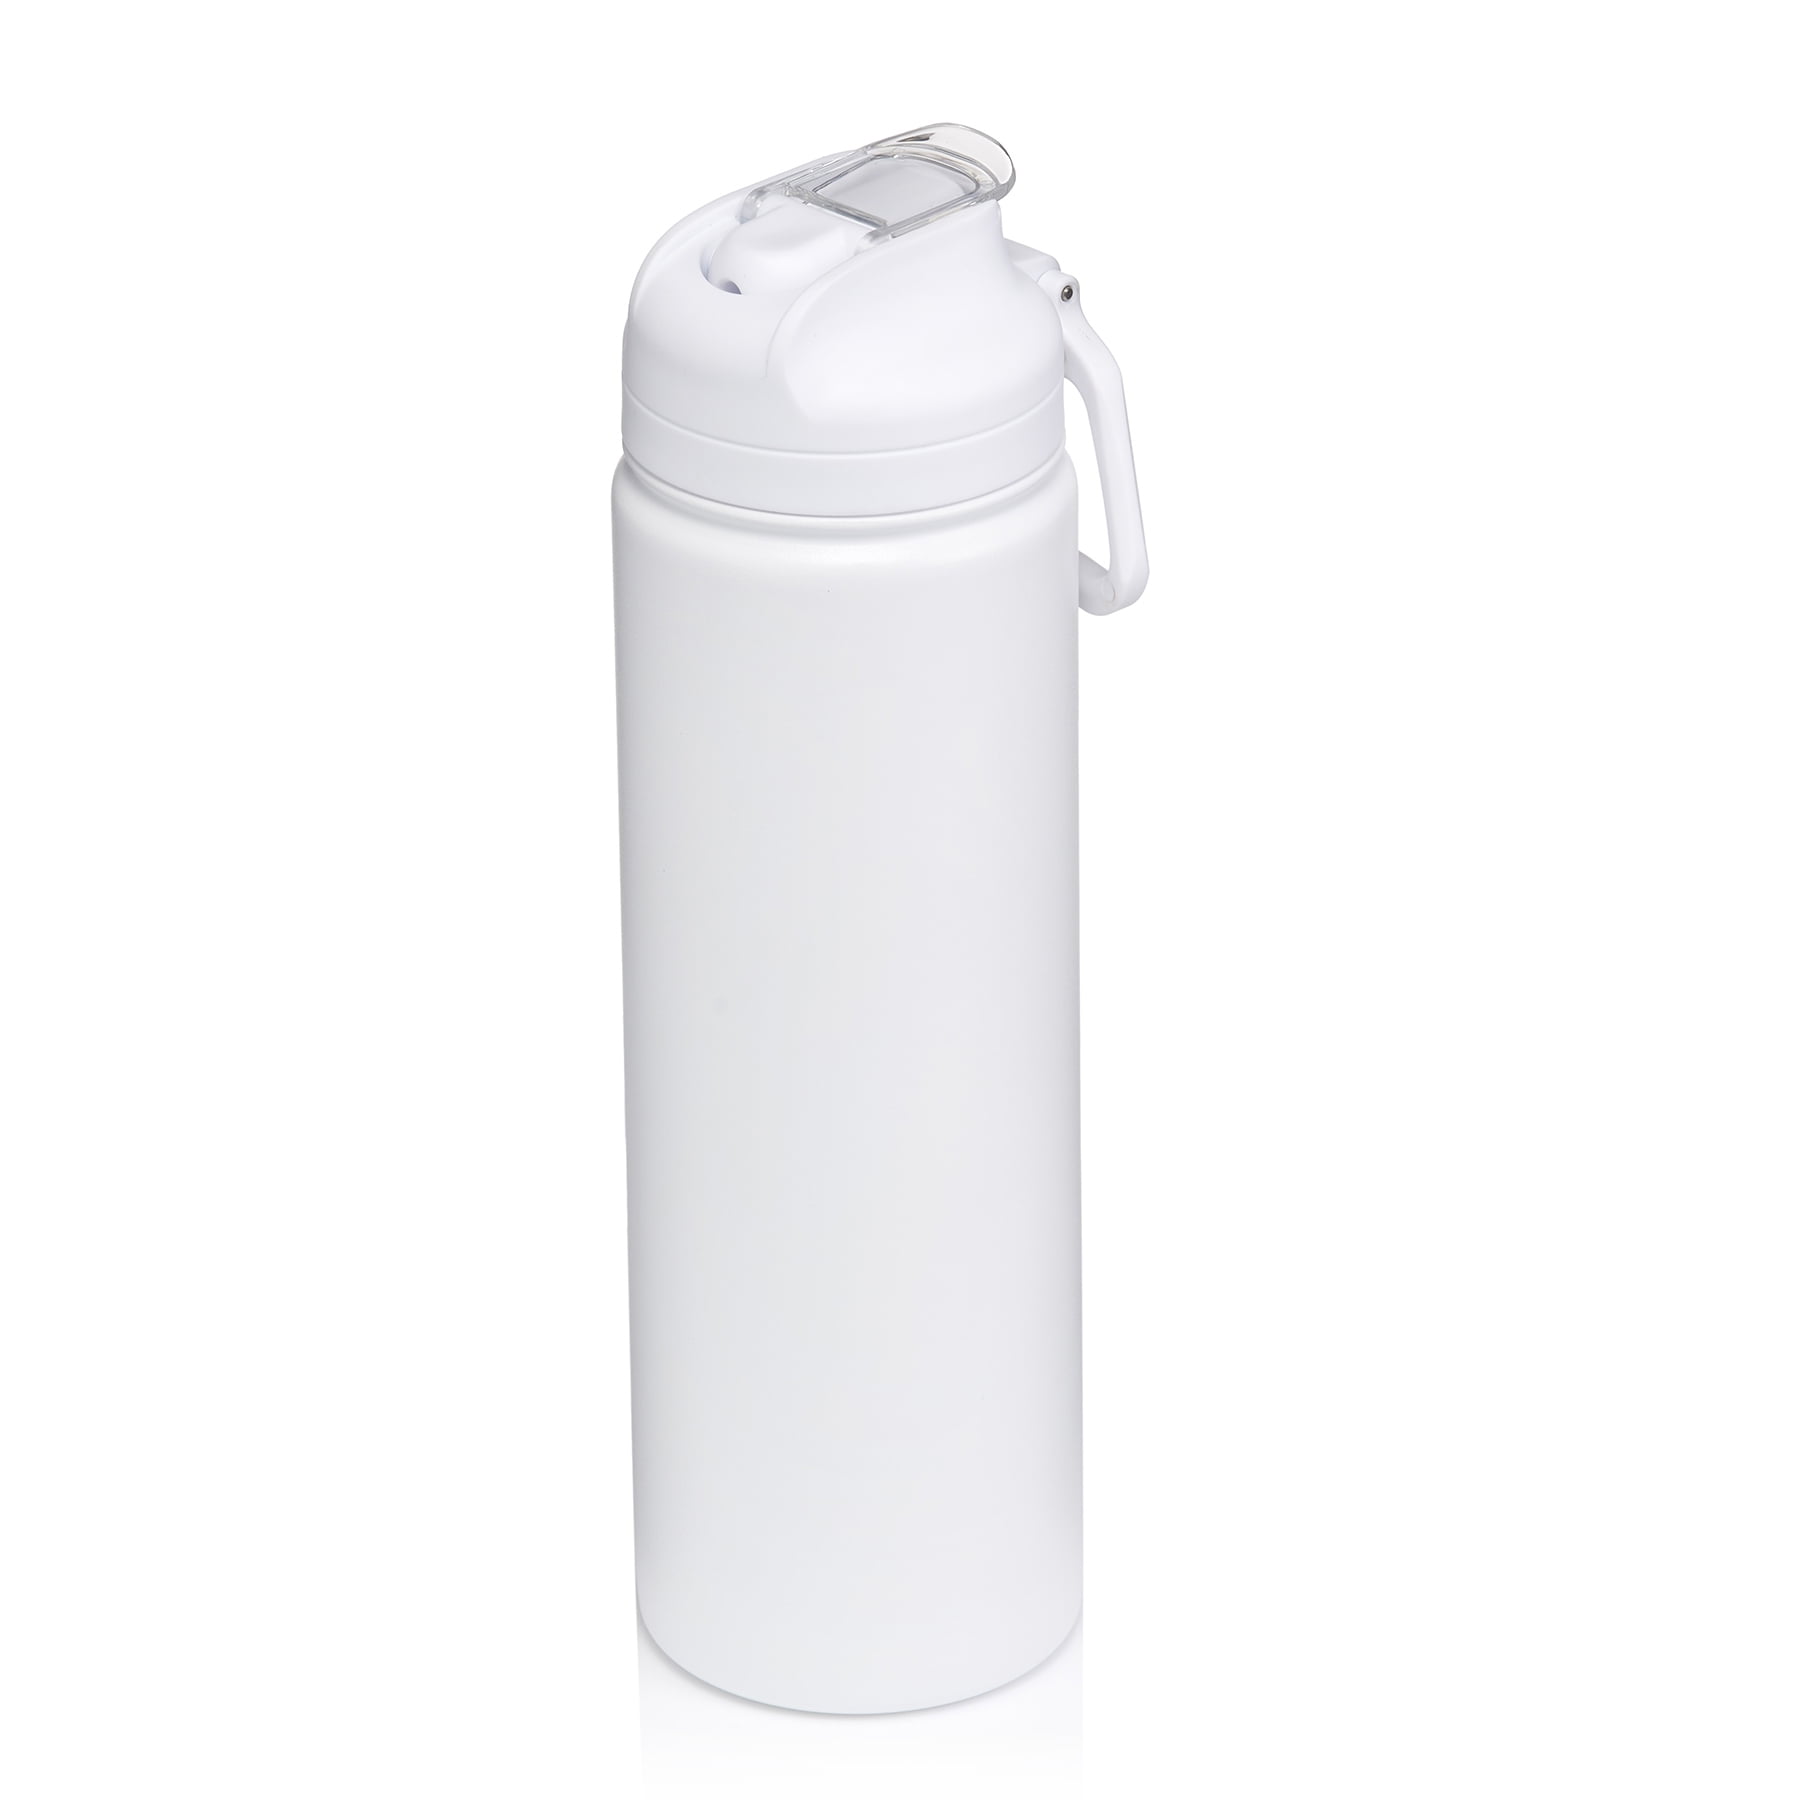 MUNATUDE Insulated Water Bottle - Insulated Water Bottle 24oz With